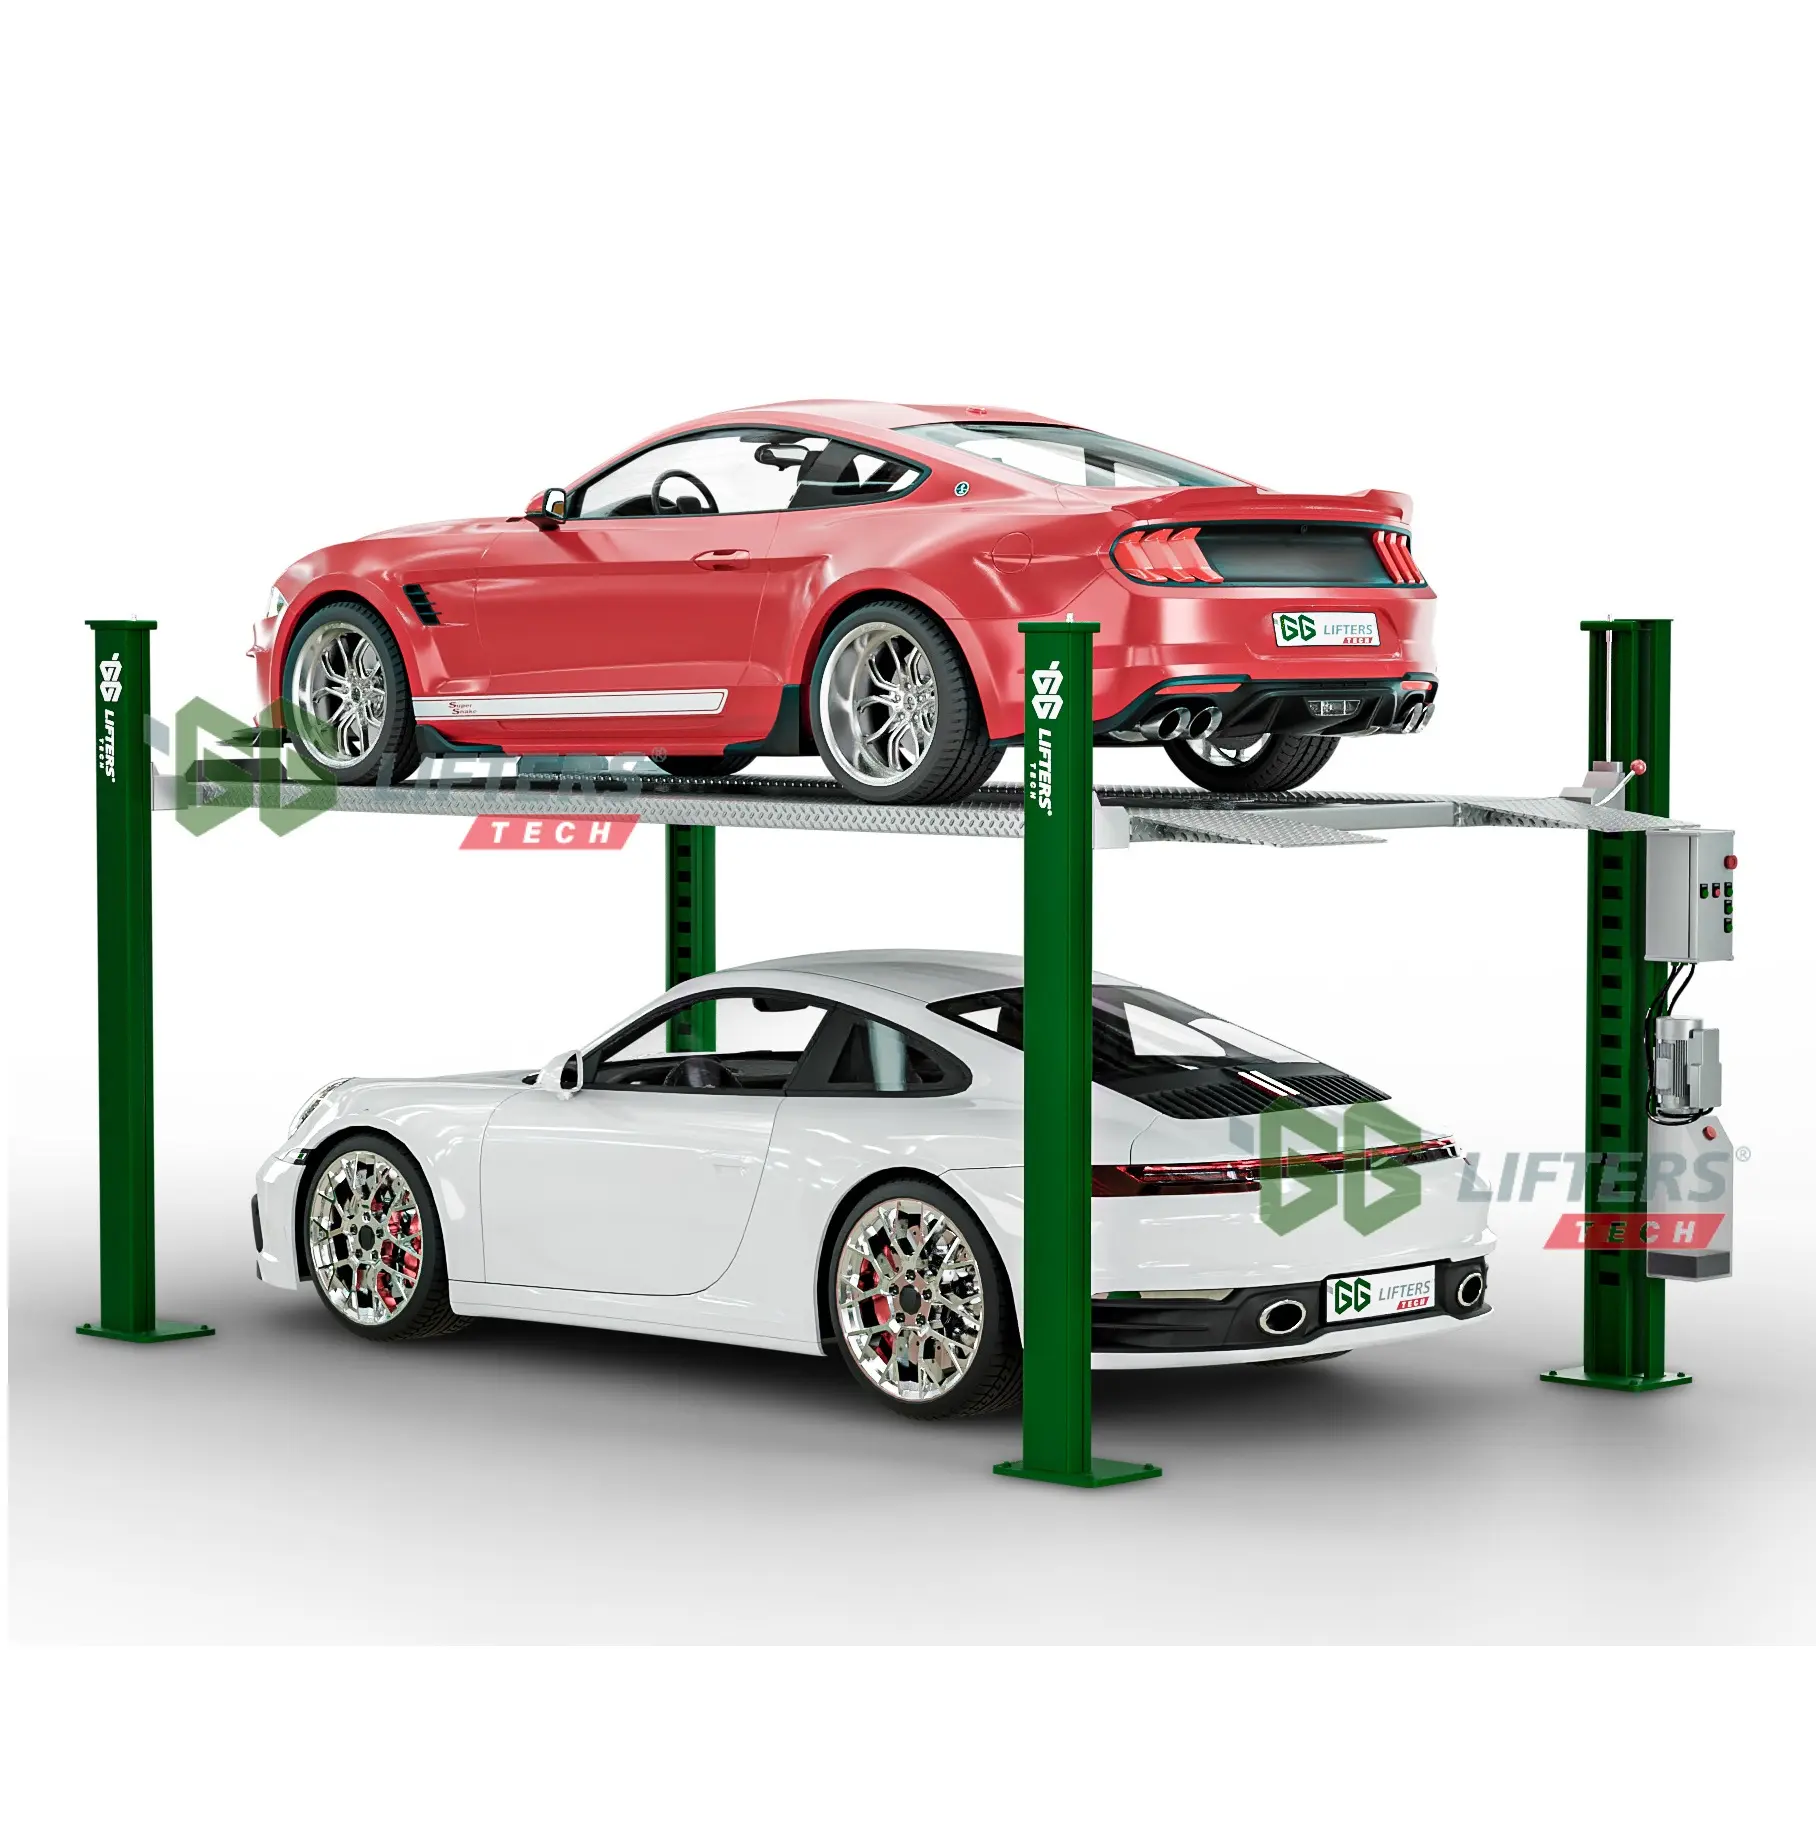 new arrival 4 Post Car Auto Parking Residential Car Lifts Parking Lifter